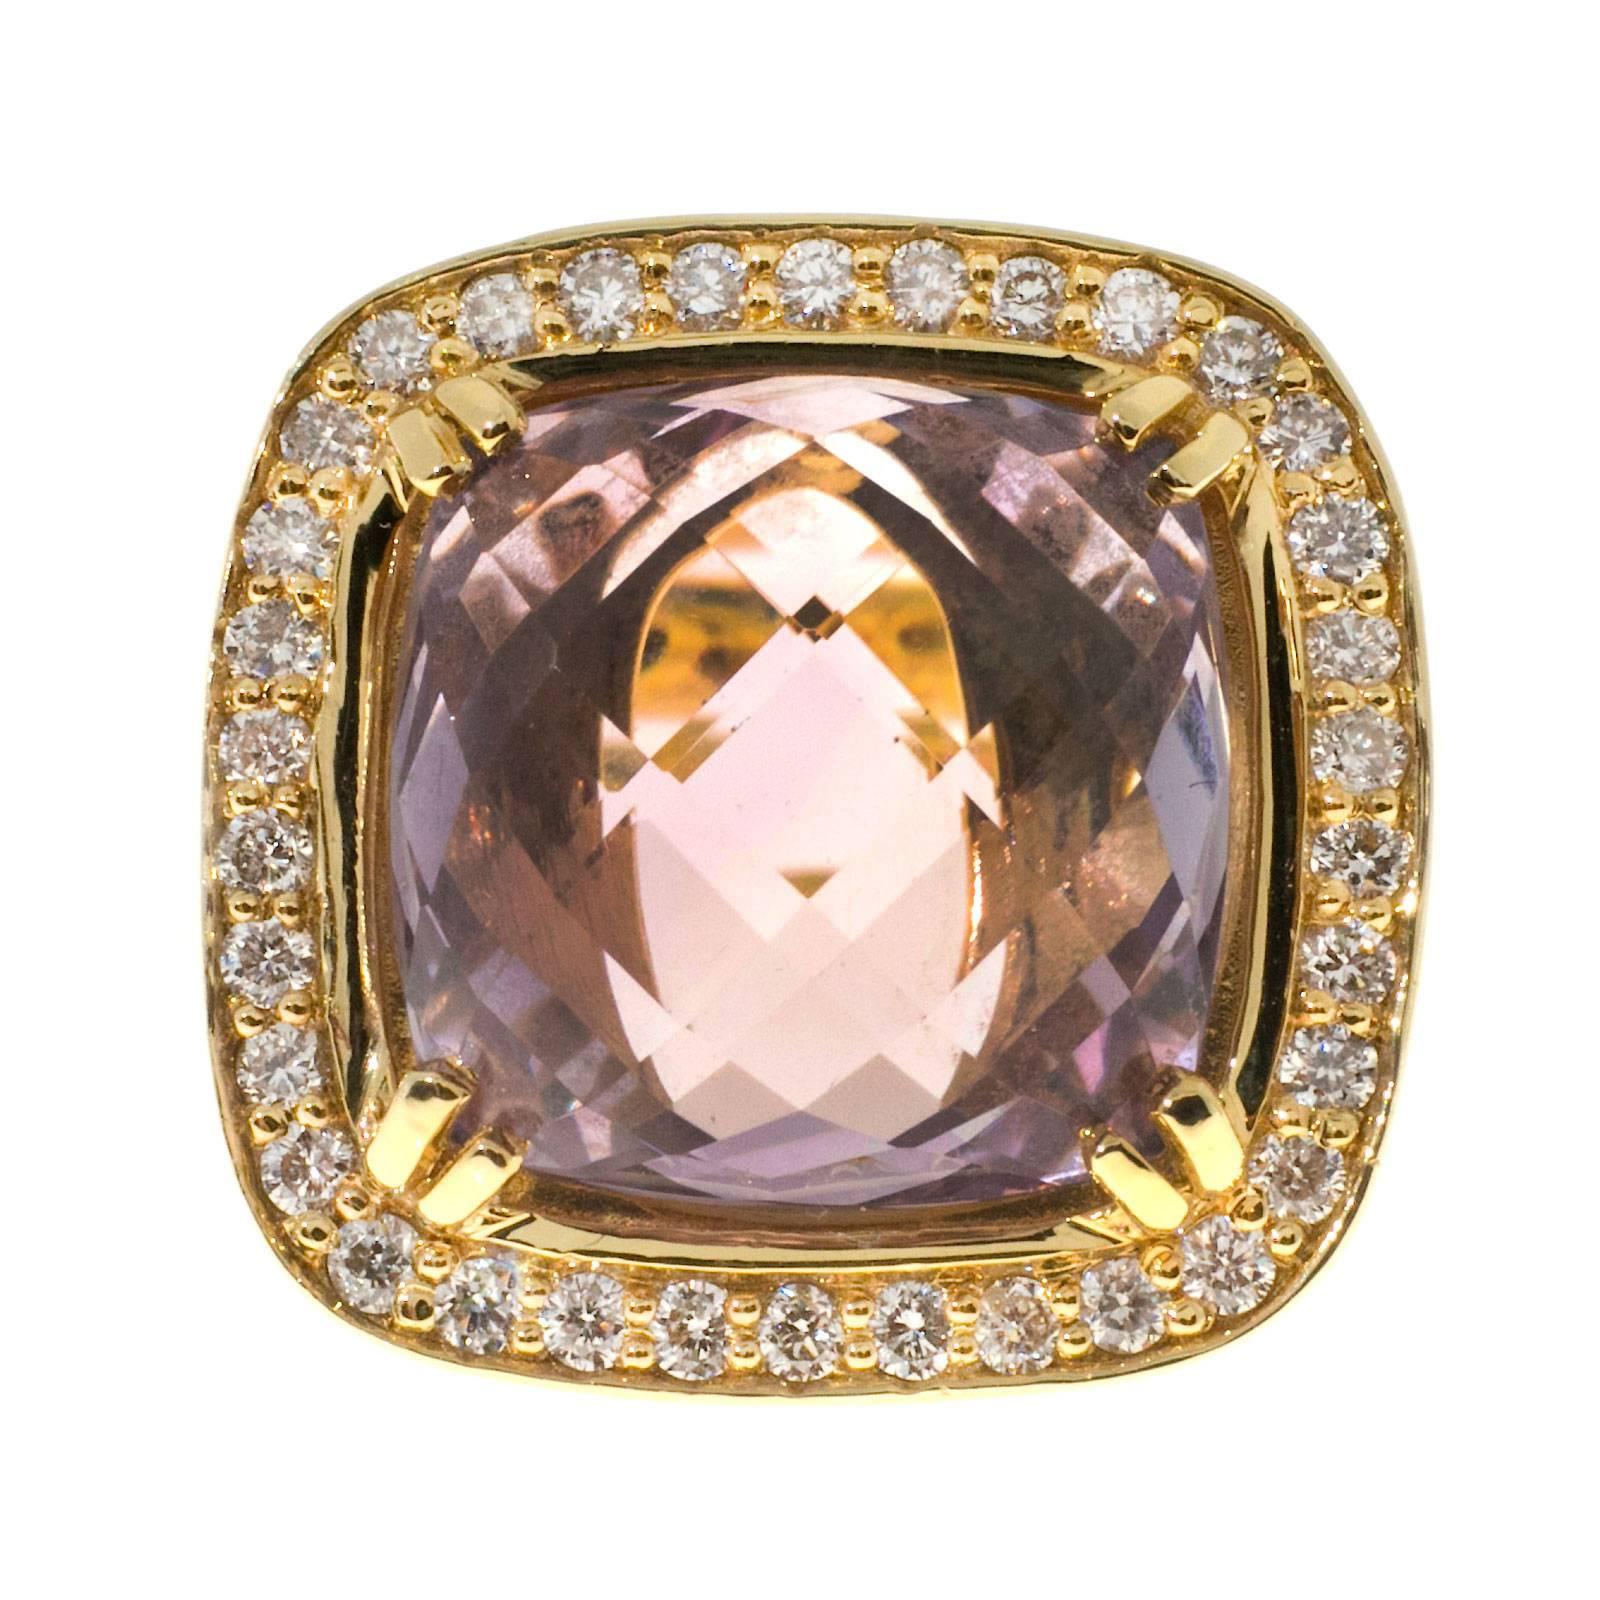 1980s 14k rose gold ring with smoky faceted top Quartz surrounded by a halo of full cut white diamonds.

One 12 x 12mm cushion smoke brown pink smoky Quartz, approx. total weight 7.00cts, VS, natural color
34 full cut diamonds, approx. total